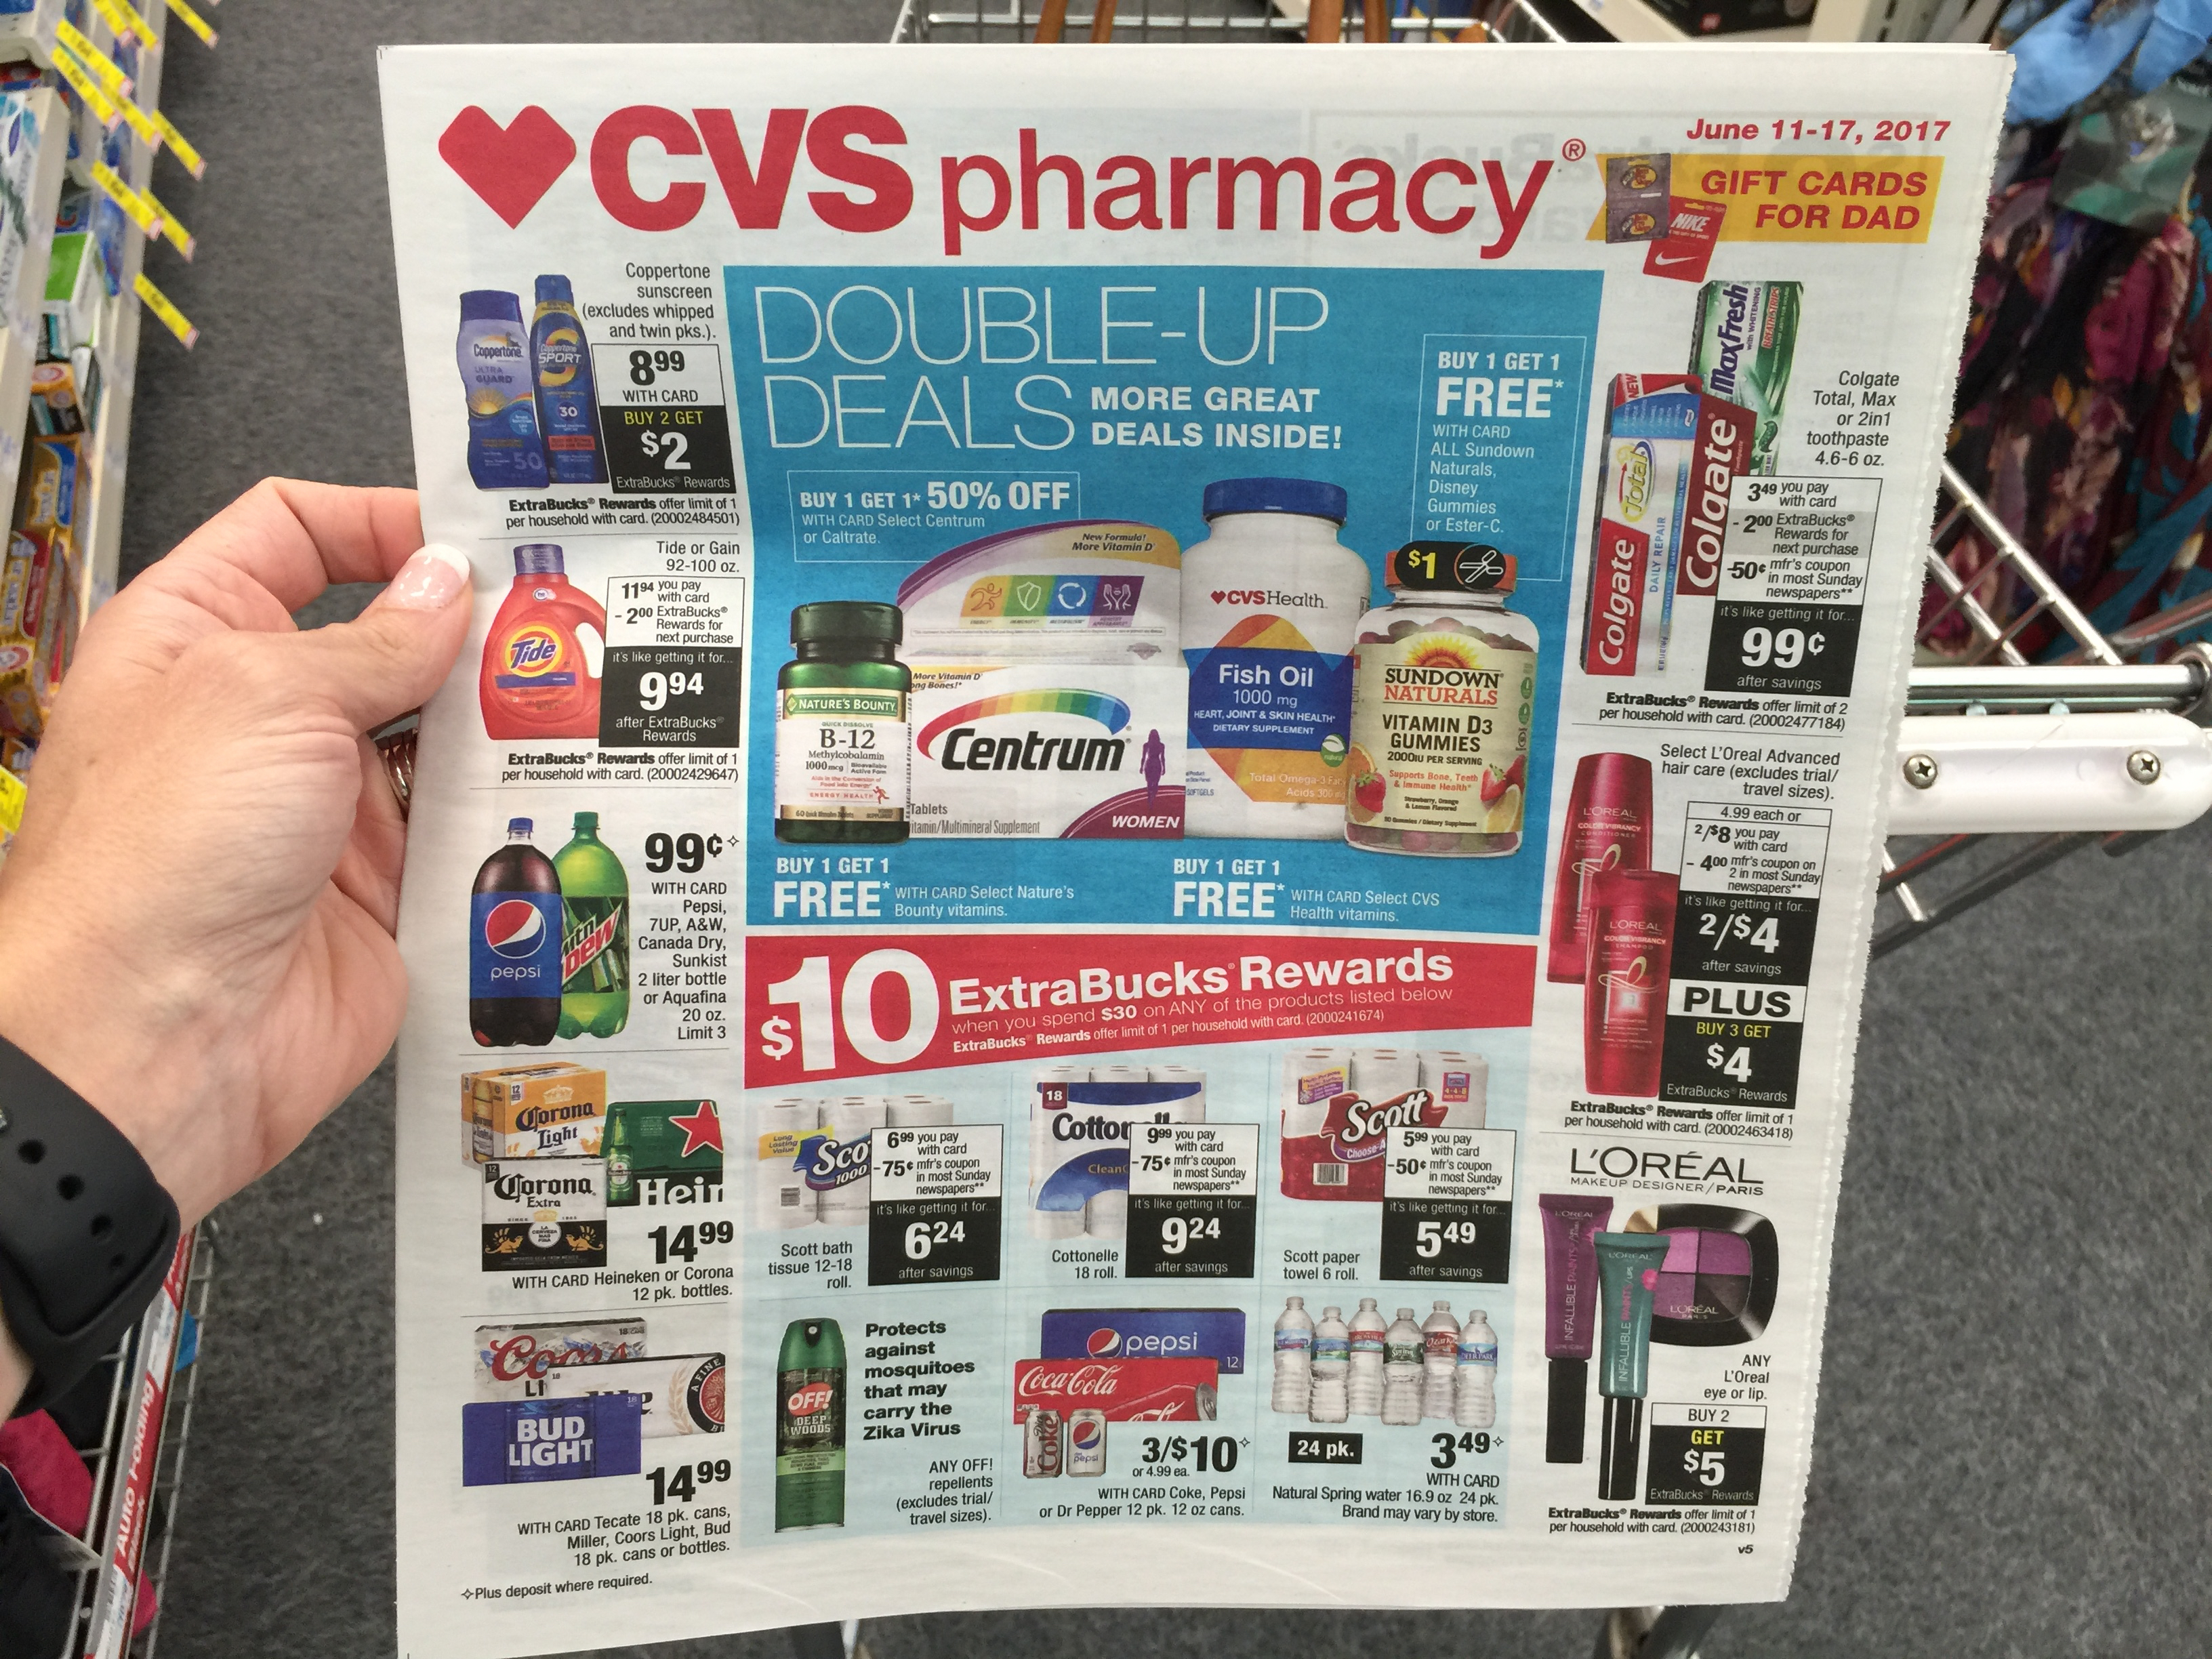 23 money saving tips you may not know about shopping at cvspharmacy – weekly ad